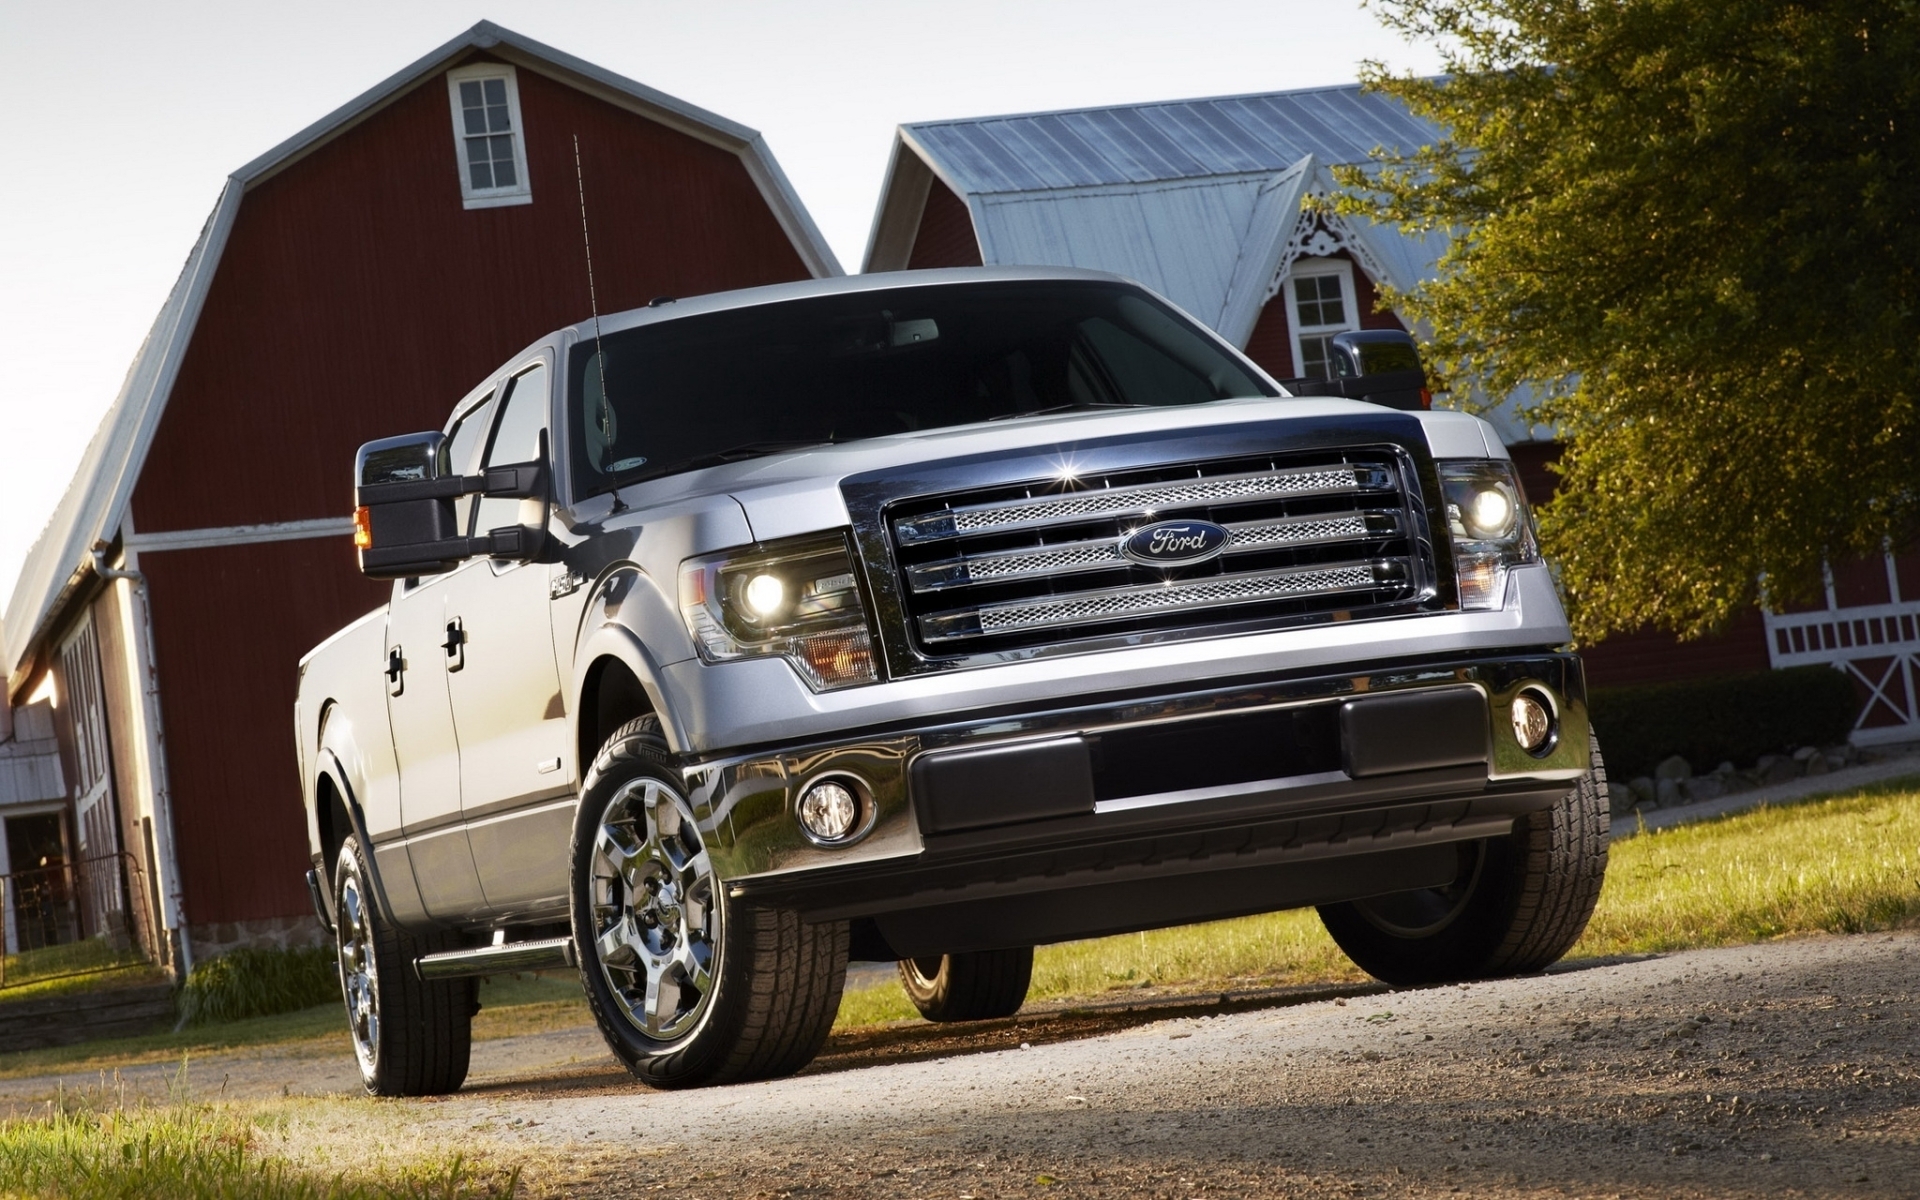 Ford F150 Computer Wallpapers, Desktop Backgrounds | 1920x1200 ...